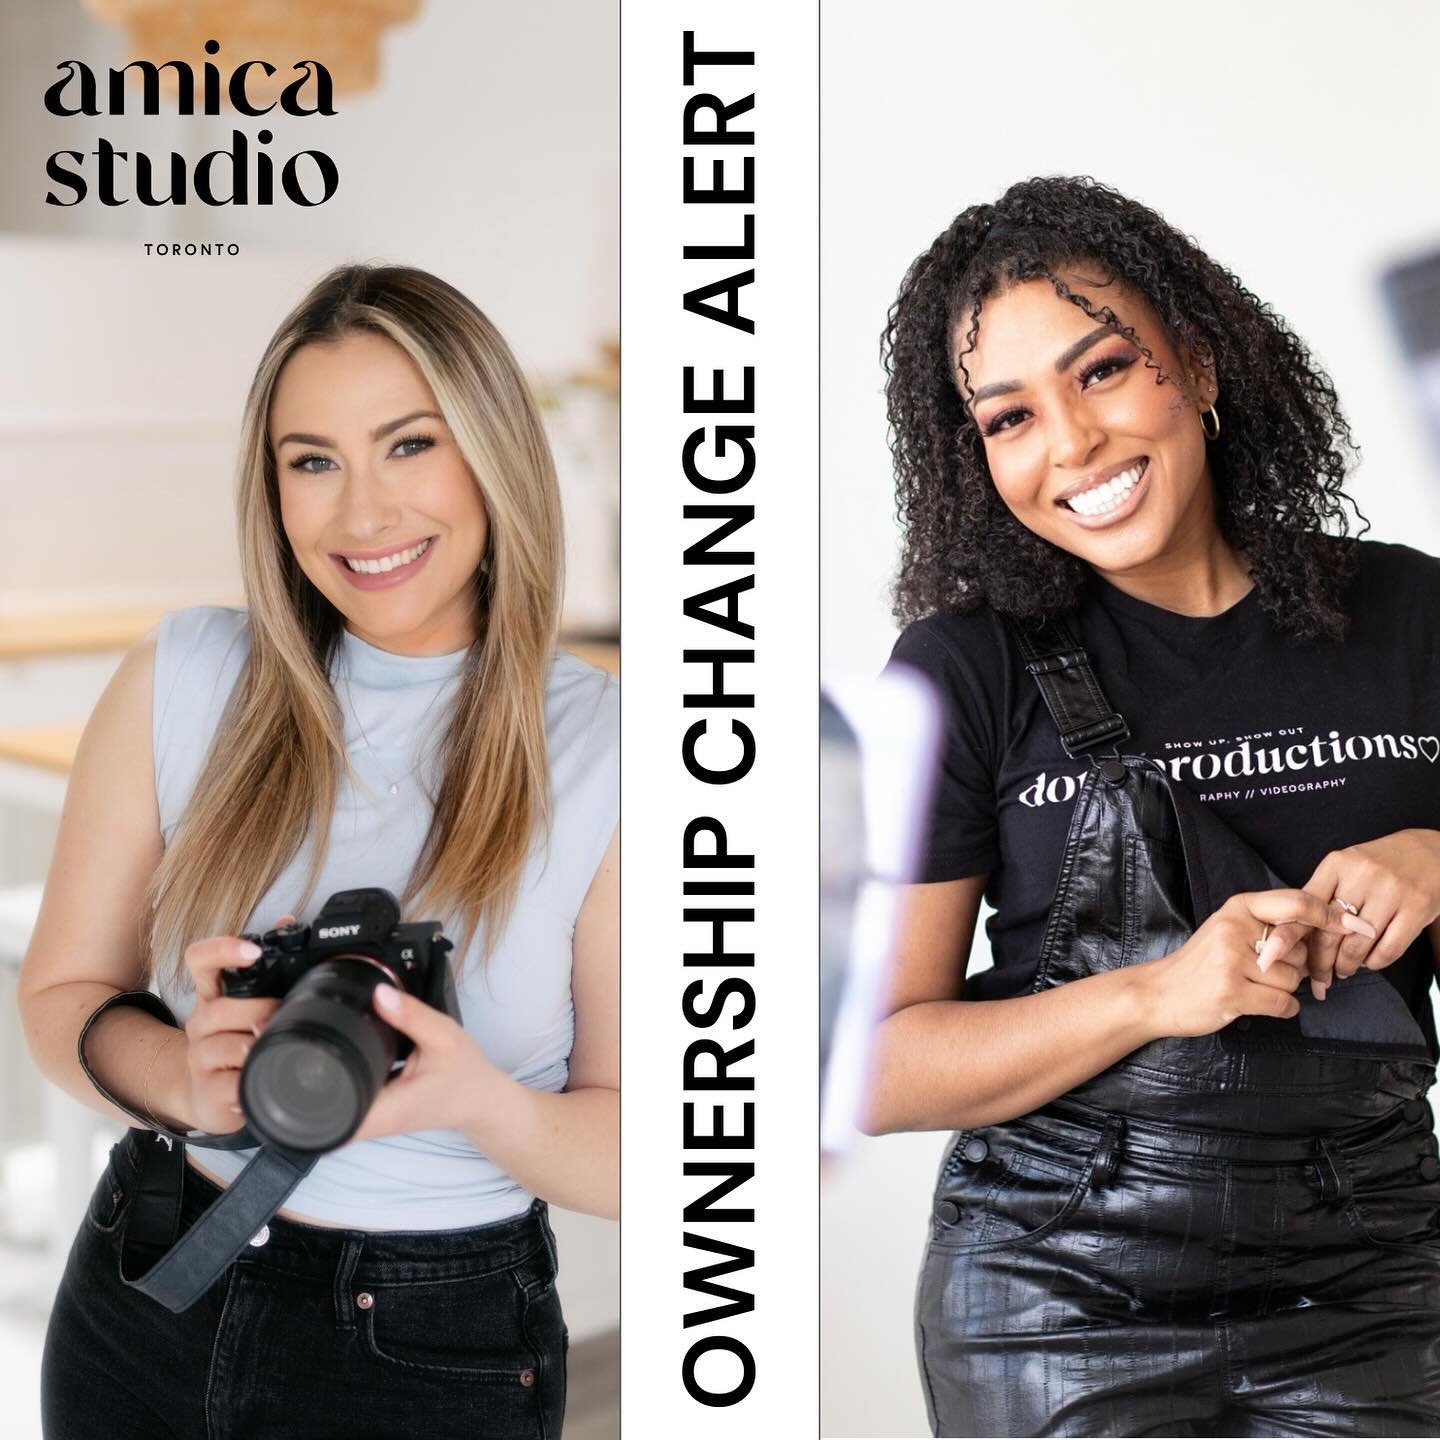 HUGE NEWS 🥳

Liz here, founder of Amica Studio! First off, I want to say thank you so much for your support ❤️

After an incredible 3 years of owning and running Amica Studio, we are passing the torch to our friends at @domproductions.ca on May 1 20